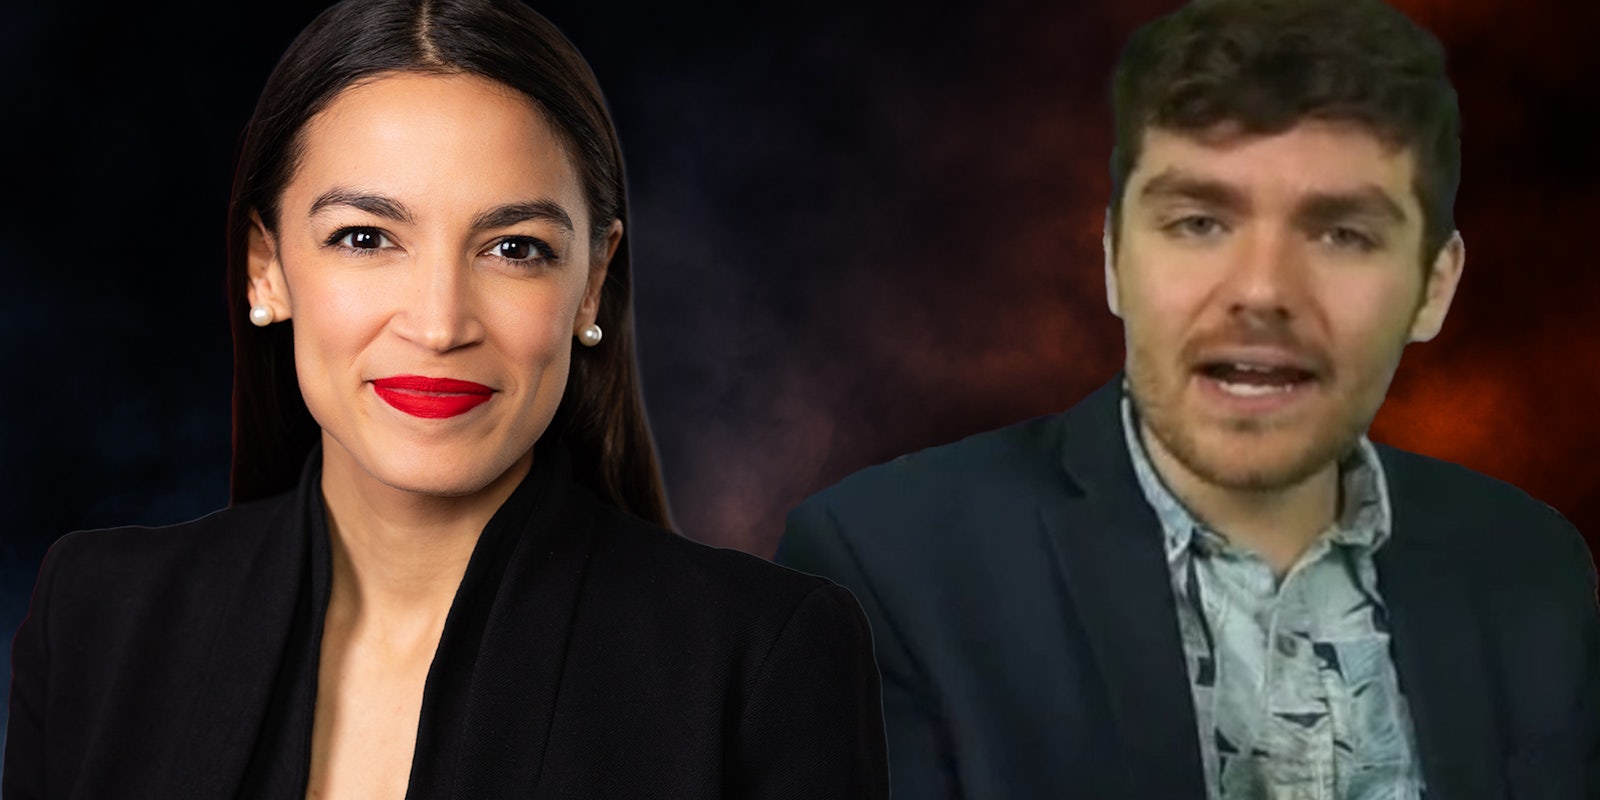 AOC rejects Nick Fuentes' praise for anti-AIPAC stance